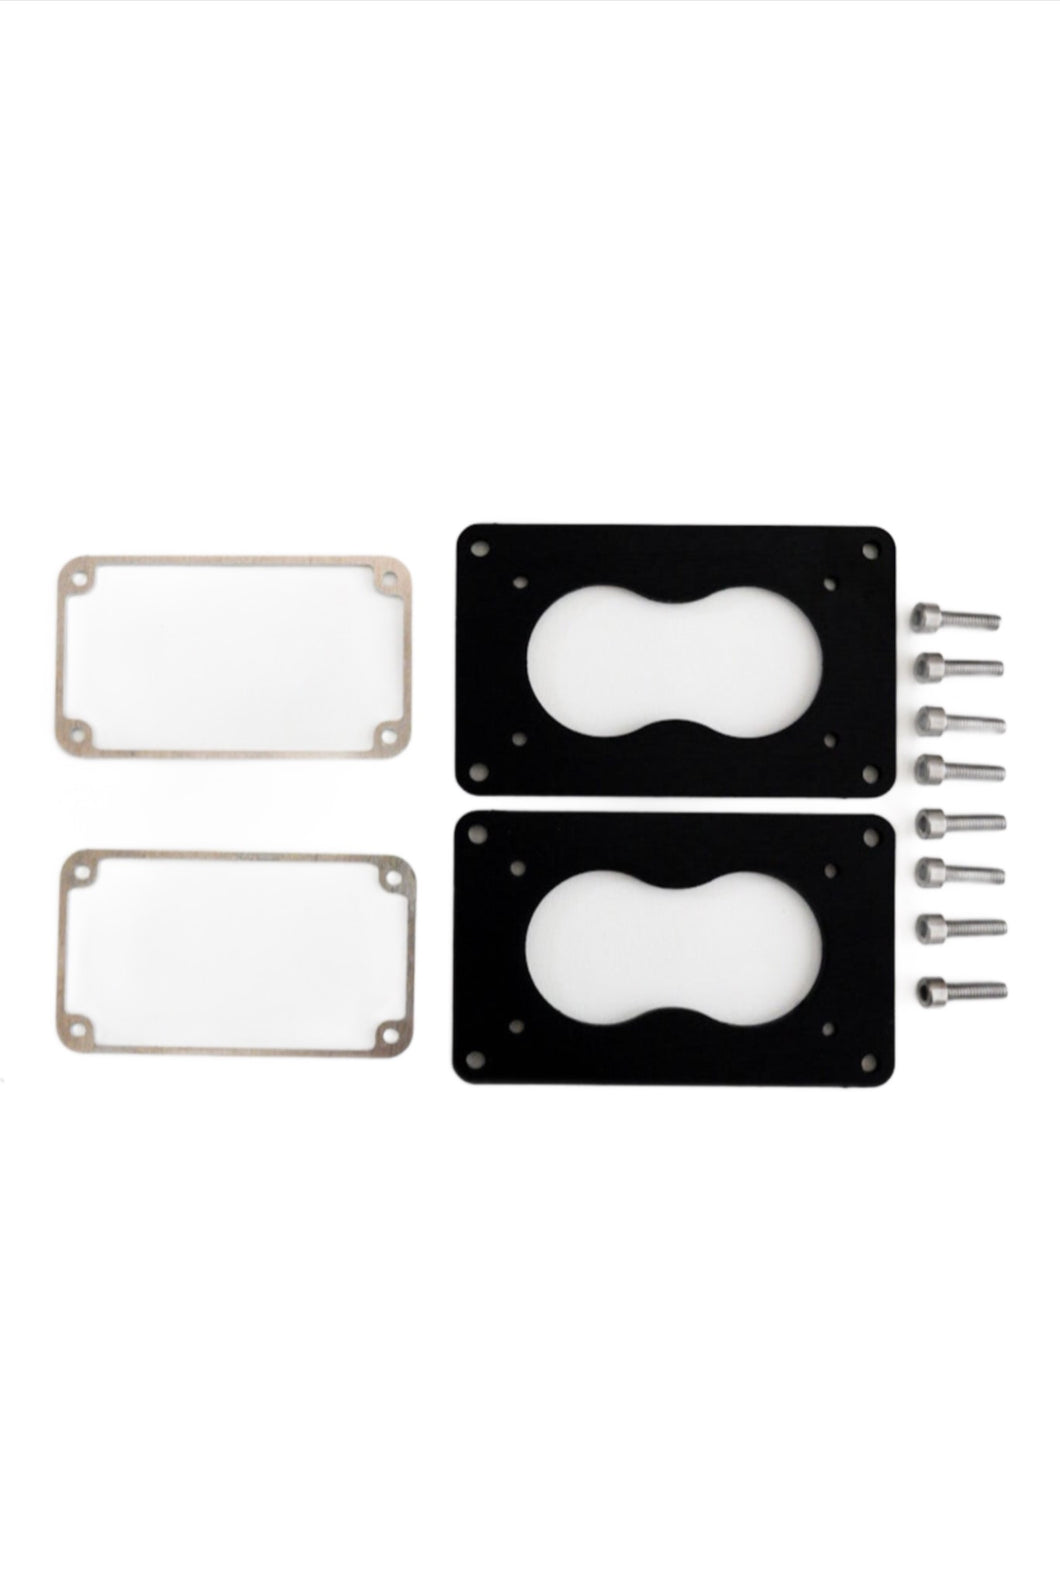 Flush Mount Bezel for Generic Light Pods (compatible with SBC Chase Light Mounts)